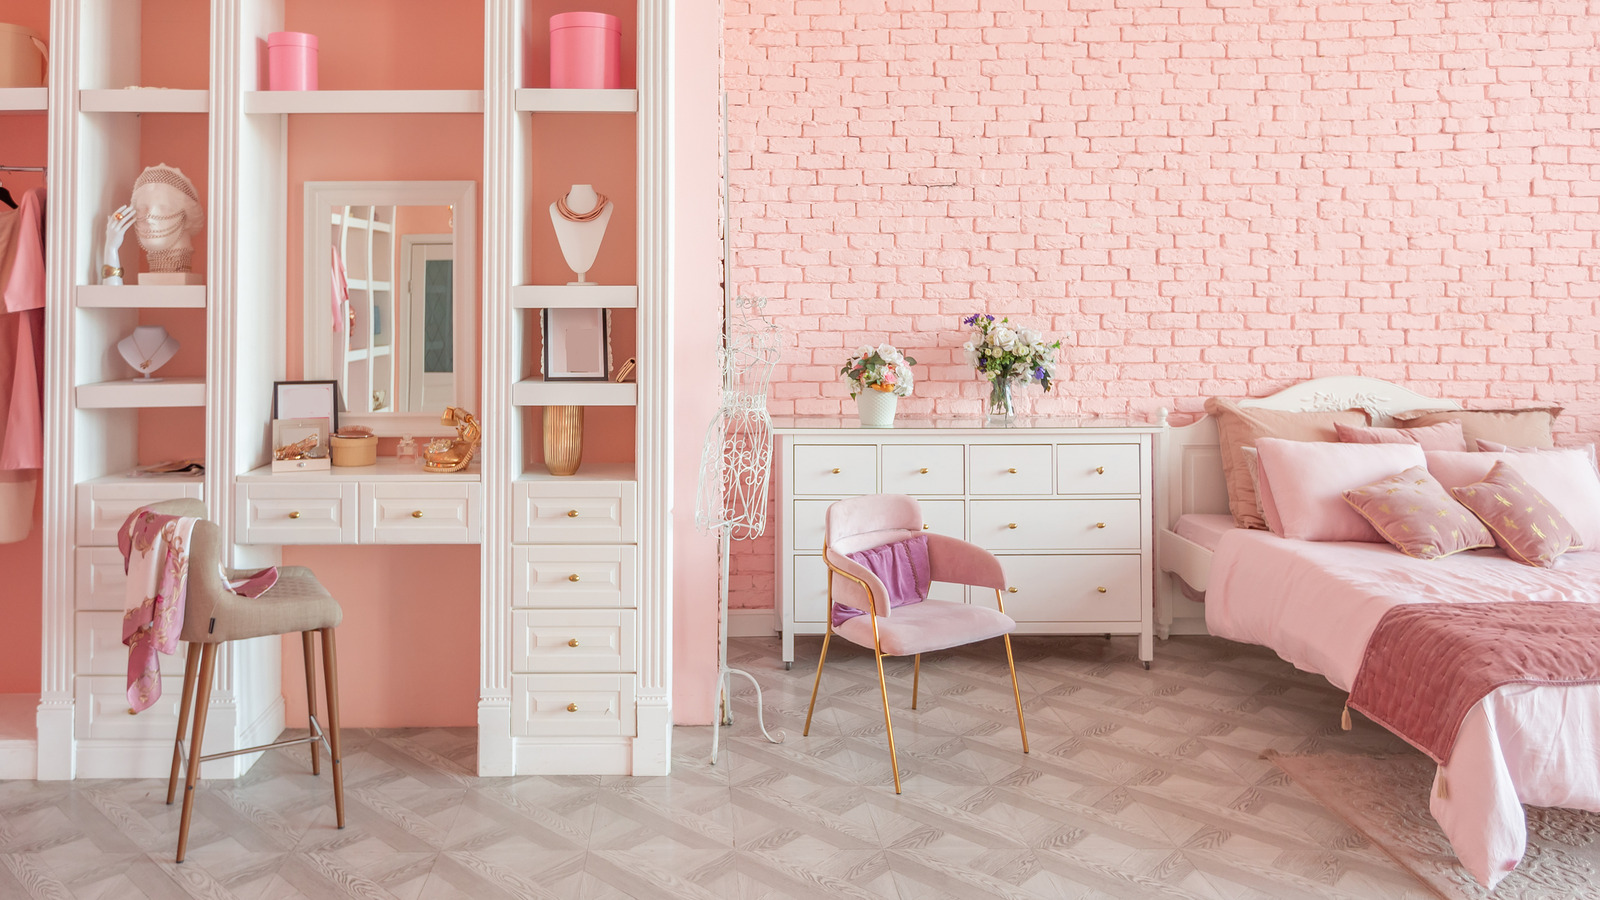 Does anyone else have pink or coquette themed decor? : r/coquettesque